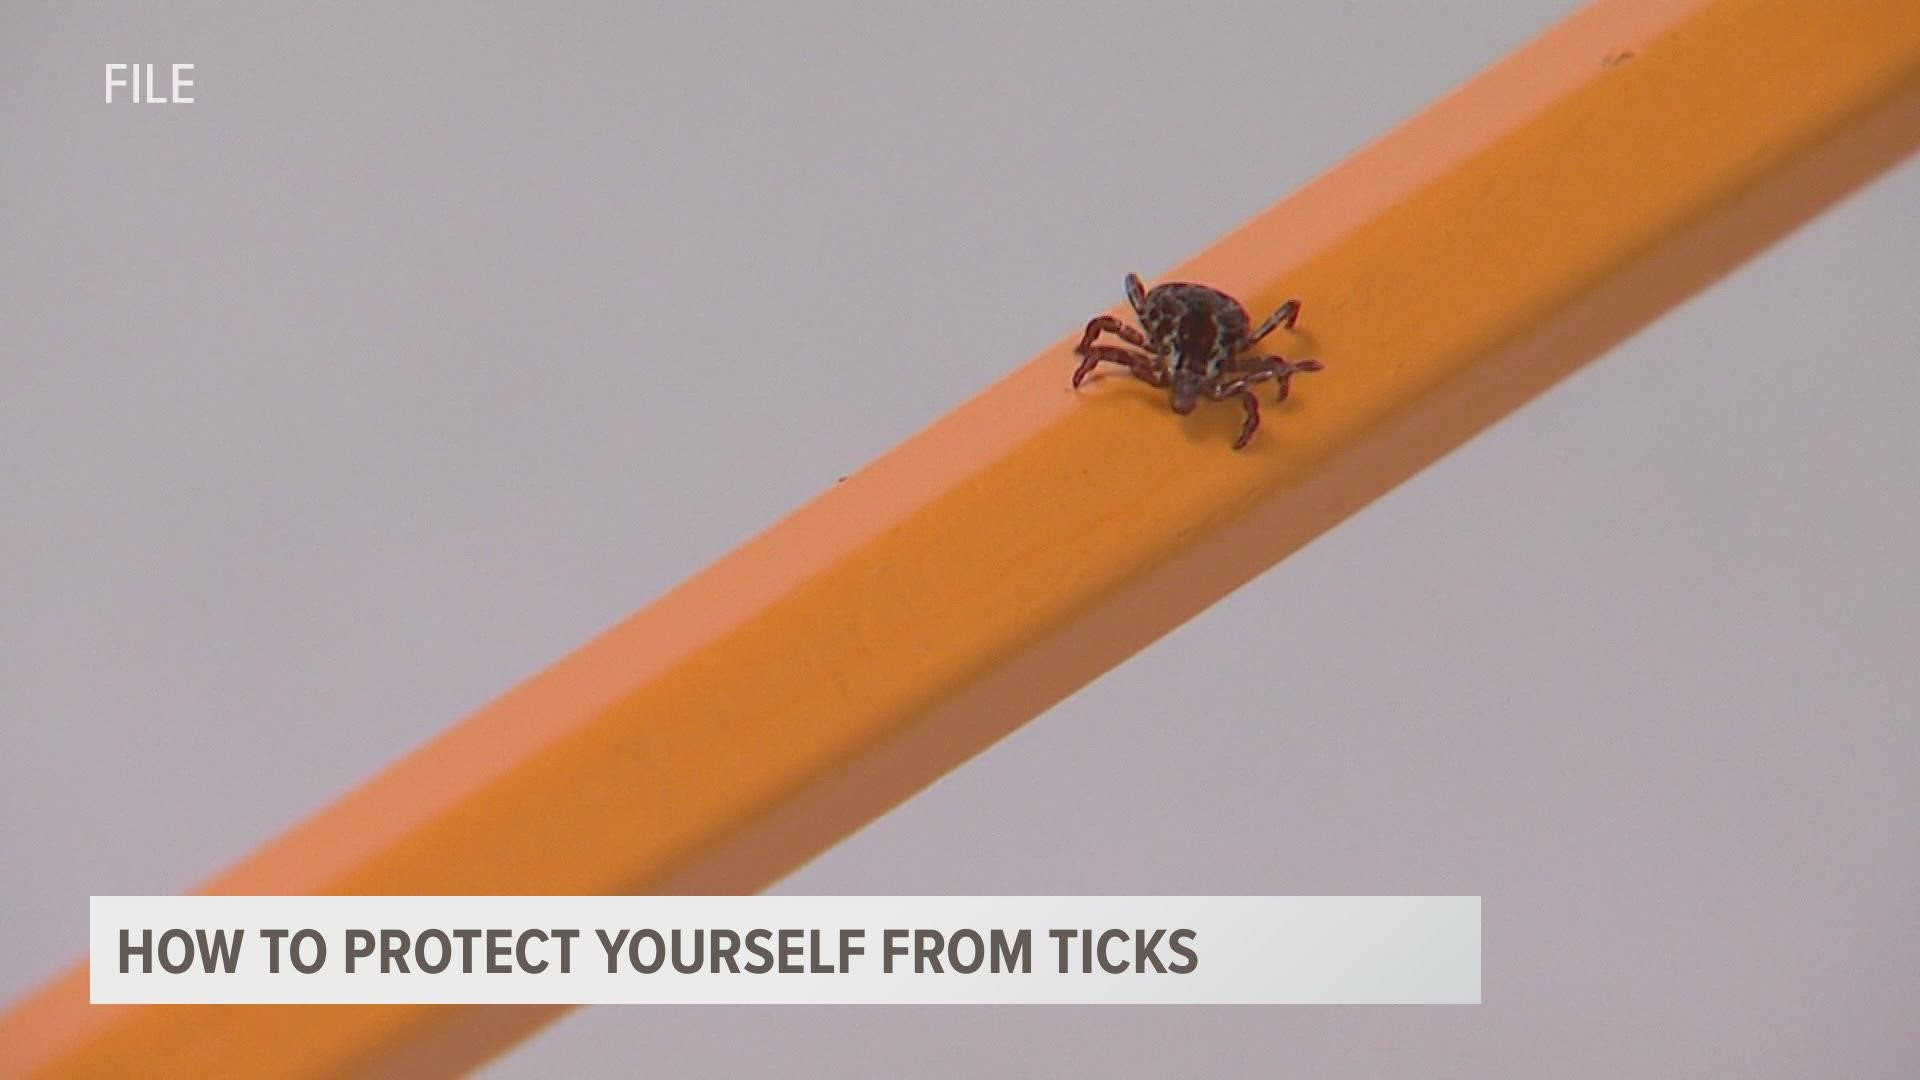 The Michigan Department of Health and Human Services has seen double the amount of people, from 2020 to 2021, contracting Lyme disease.